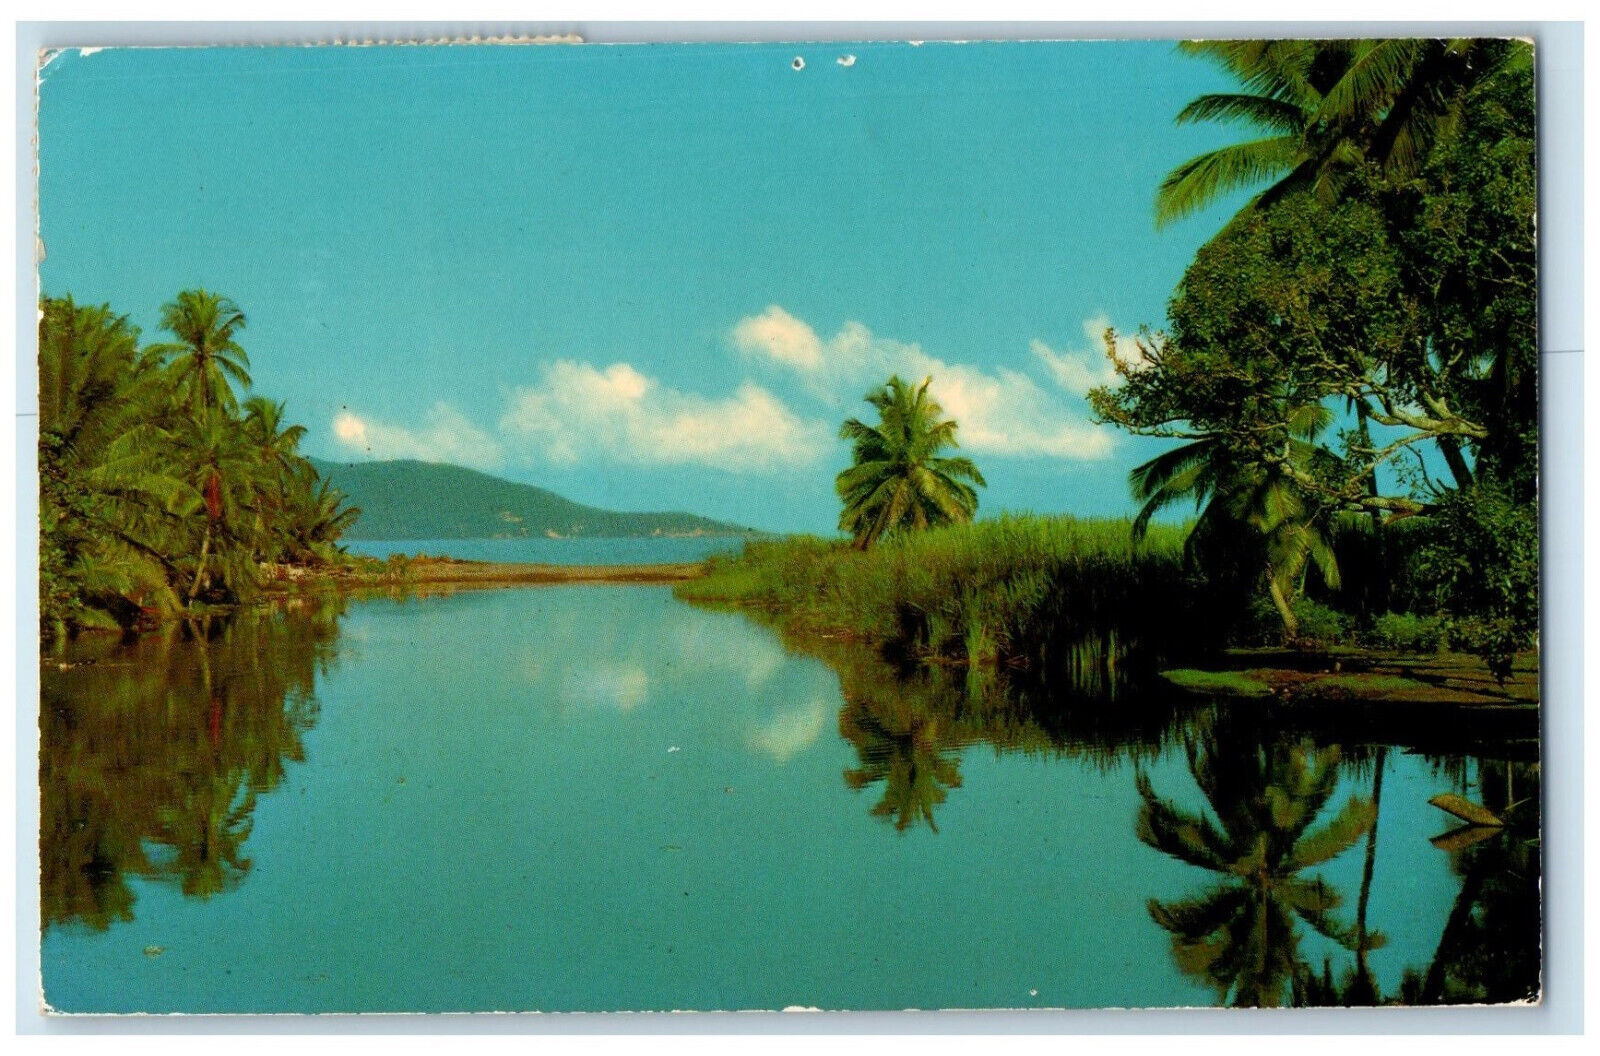 1972 Reflections on Peaceful River Scene Jamaica Posted Vintage Postcard